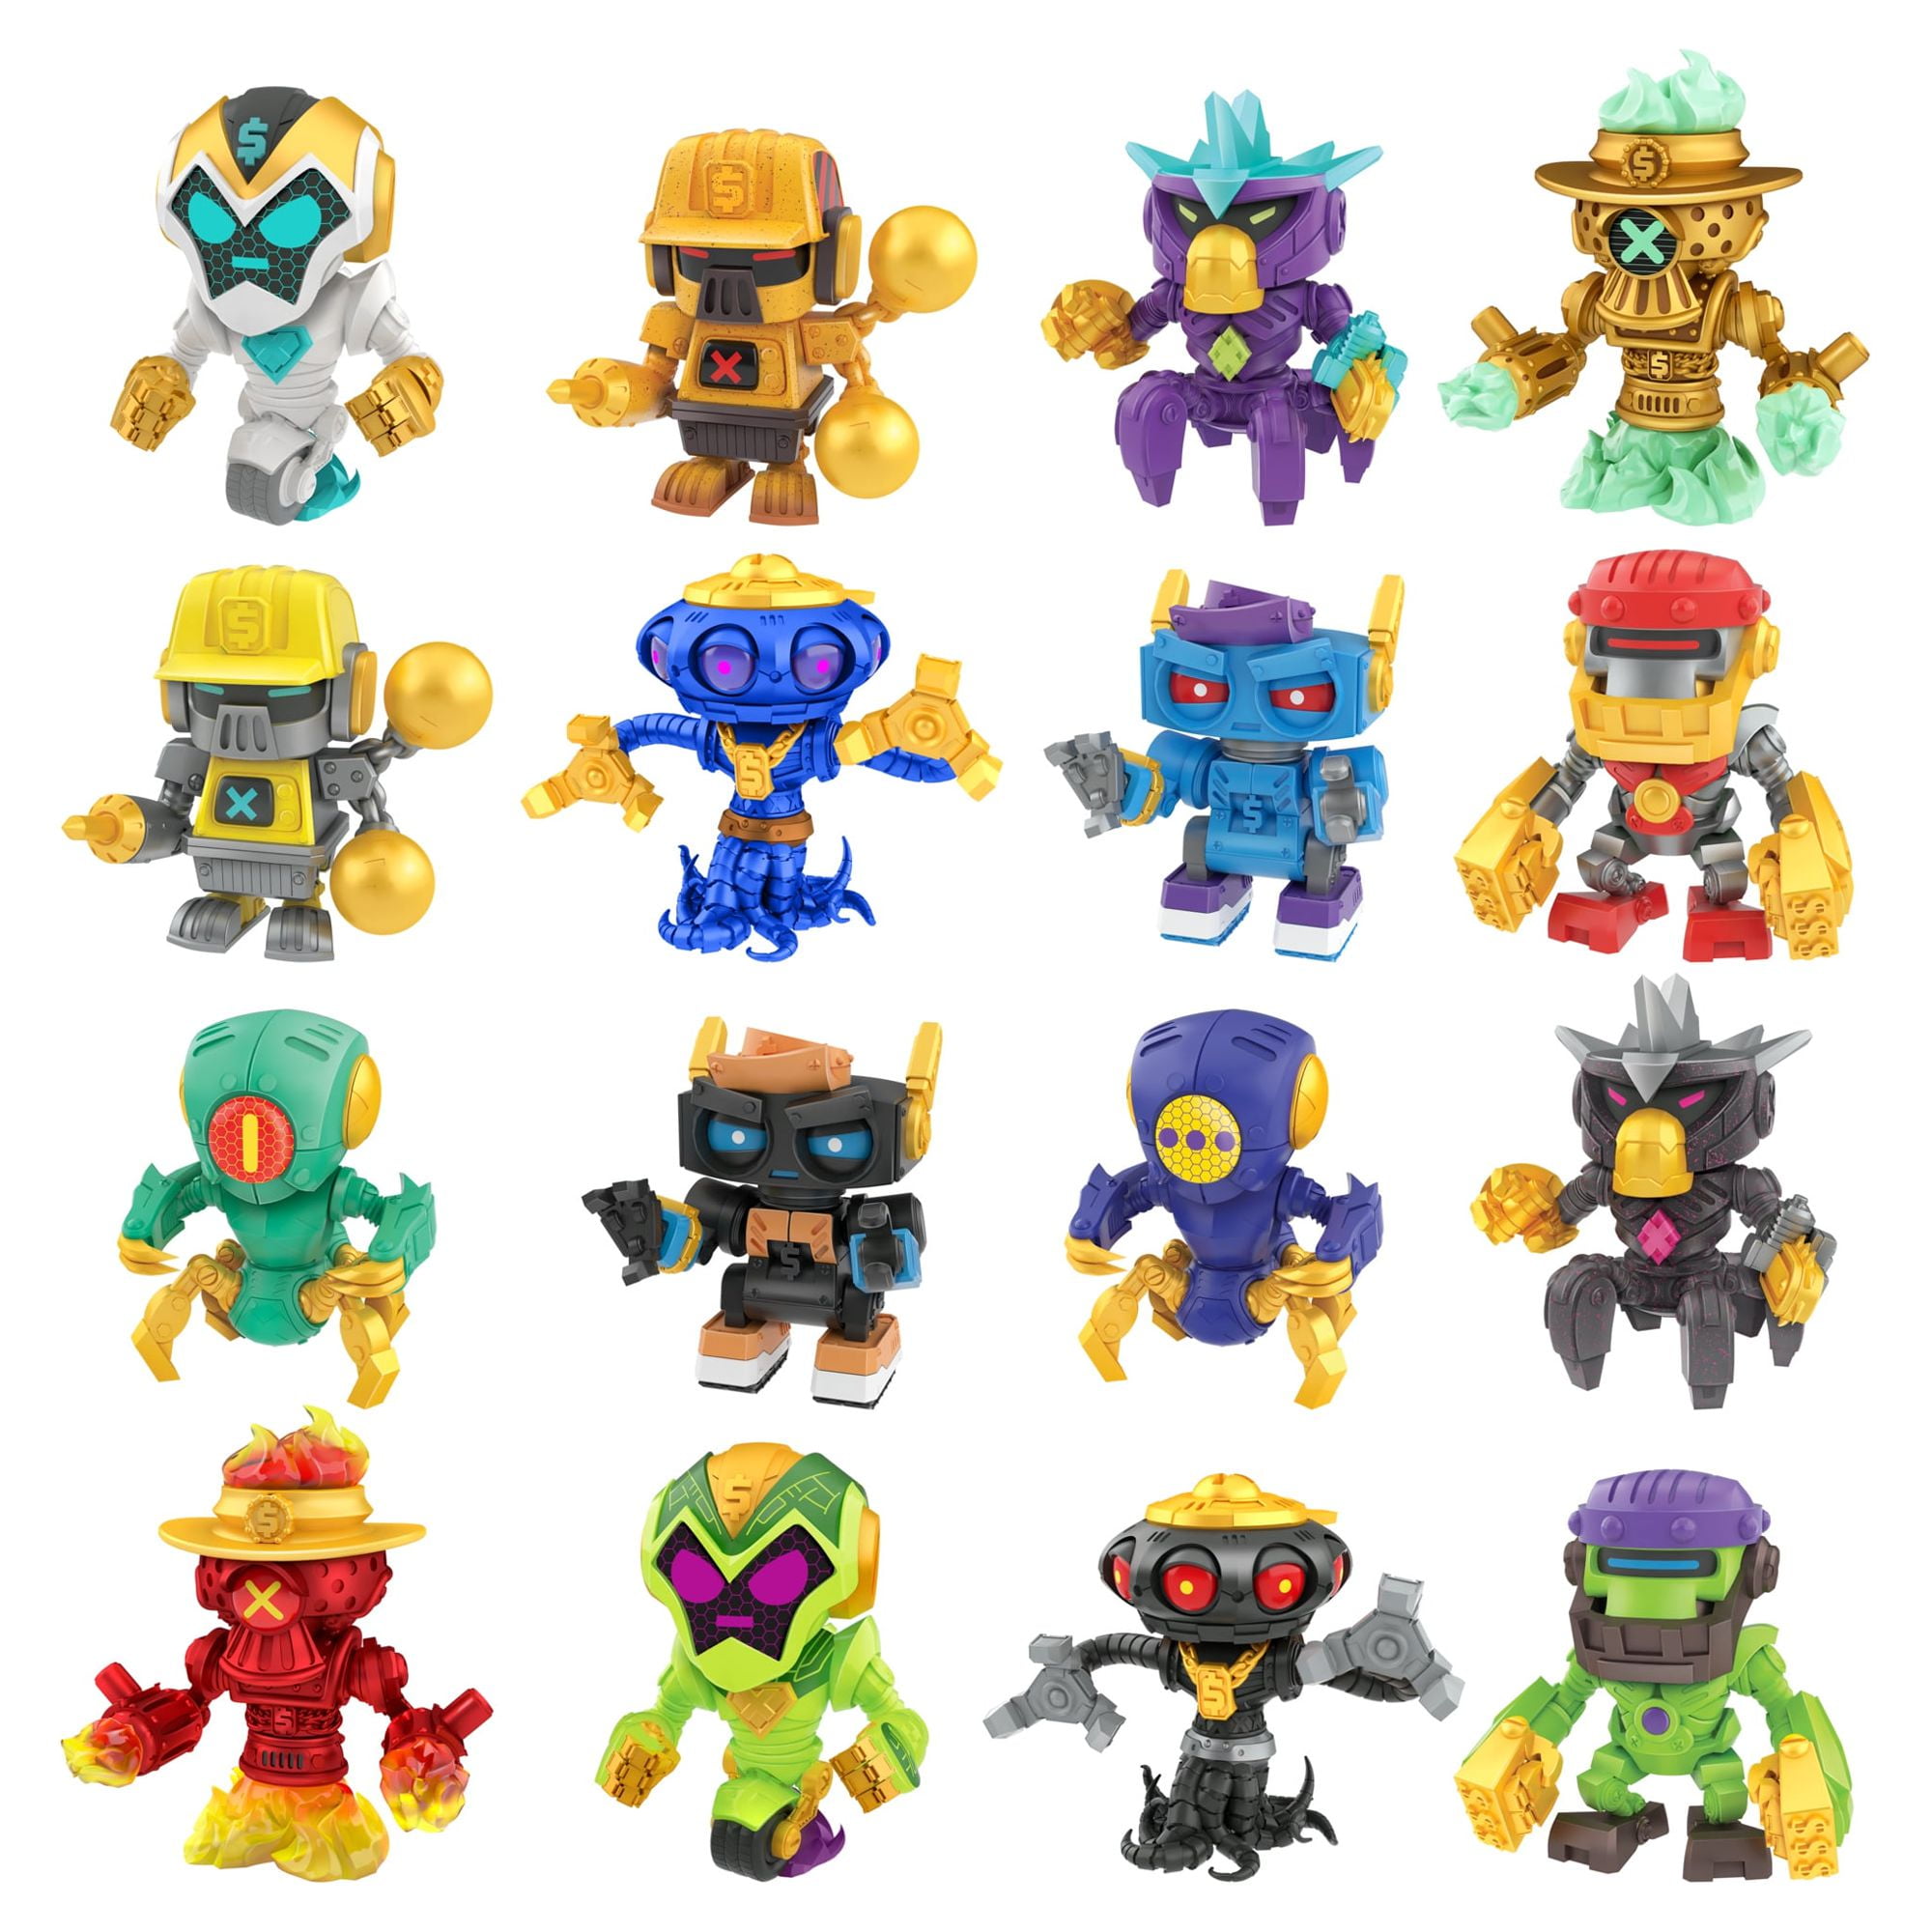 Treasure X Robots Gold Mini Robots To Remove The Rust, Build  Your Bot, 16 To Will You Find Real Gold Dipped Treasure?, Boys,  Toys For Kids, Ages 5+, Colors